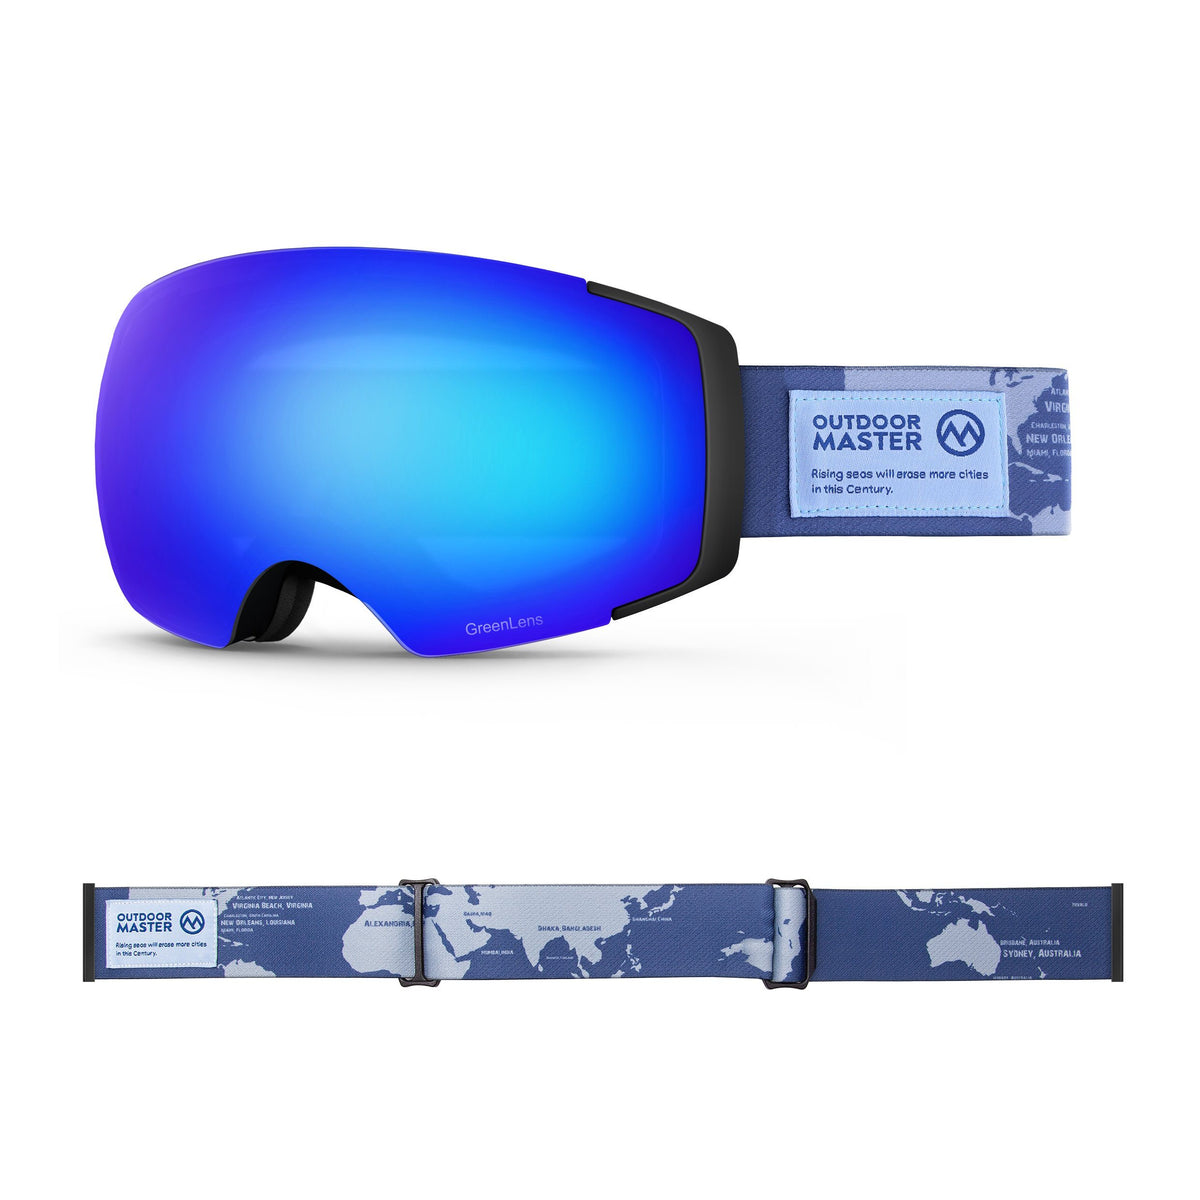 Eco-friendly Ski Goggles Pro Series - The Disappearing Places/Classic BambooStraps Limited Edition OutdoorMaster GreenLens VLT 15% TAC Grey with REVO Blue Polarized The Disappearing Places